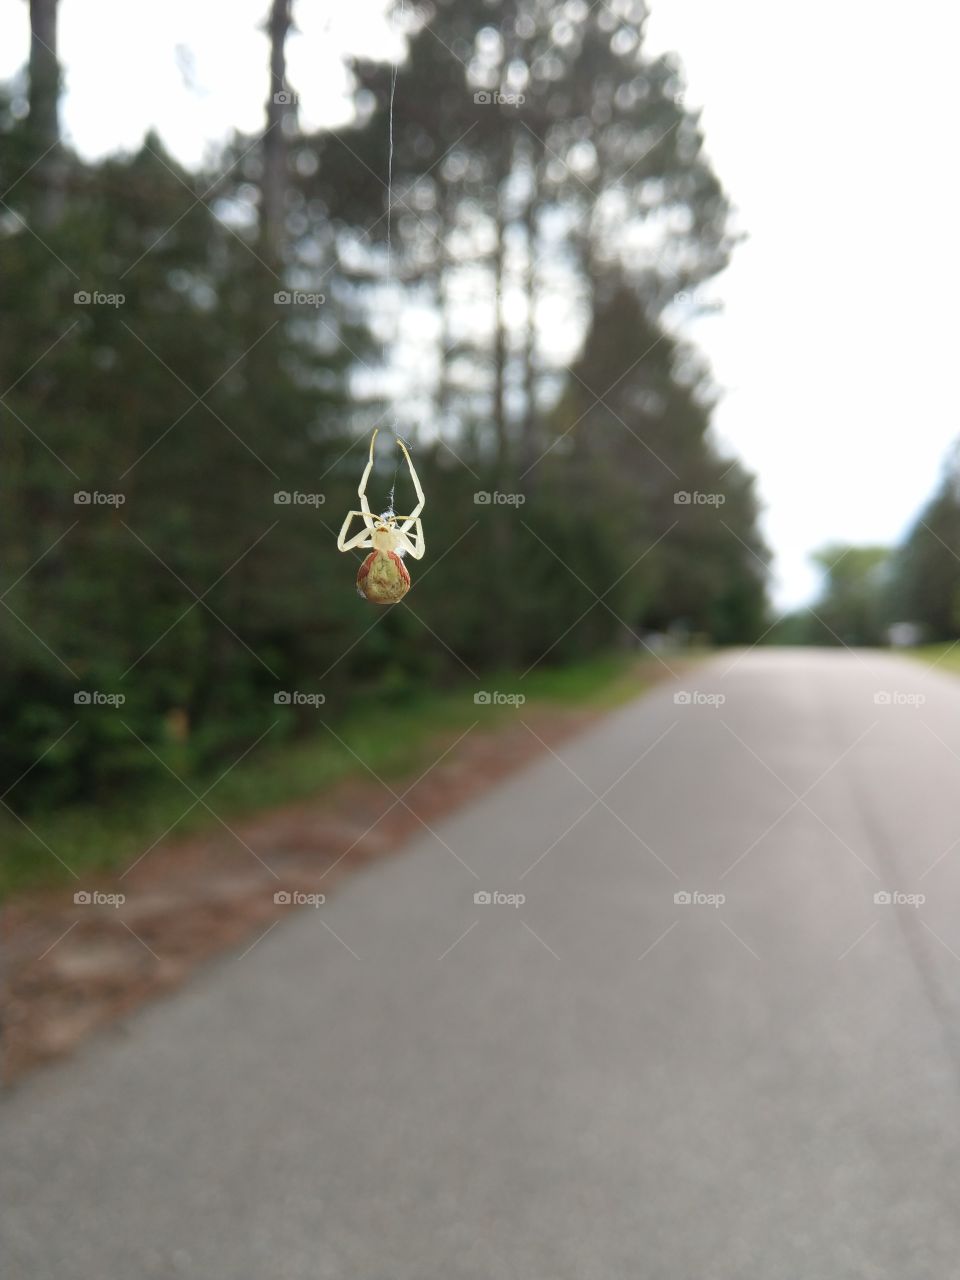 spider hanging from tree in the middle of a road